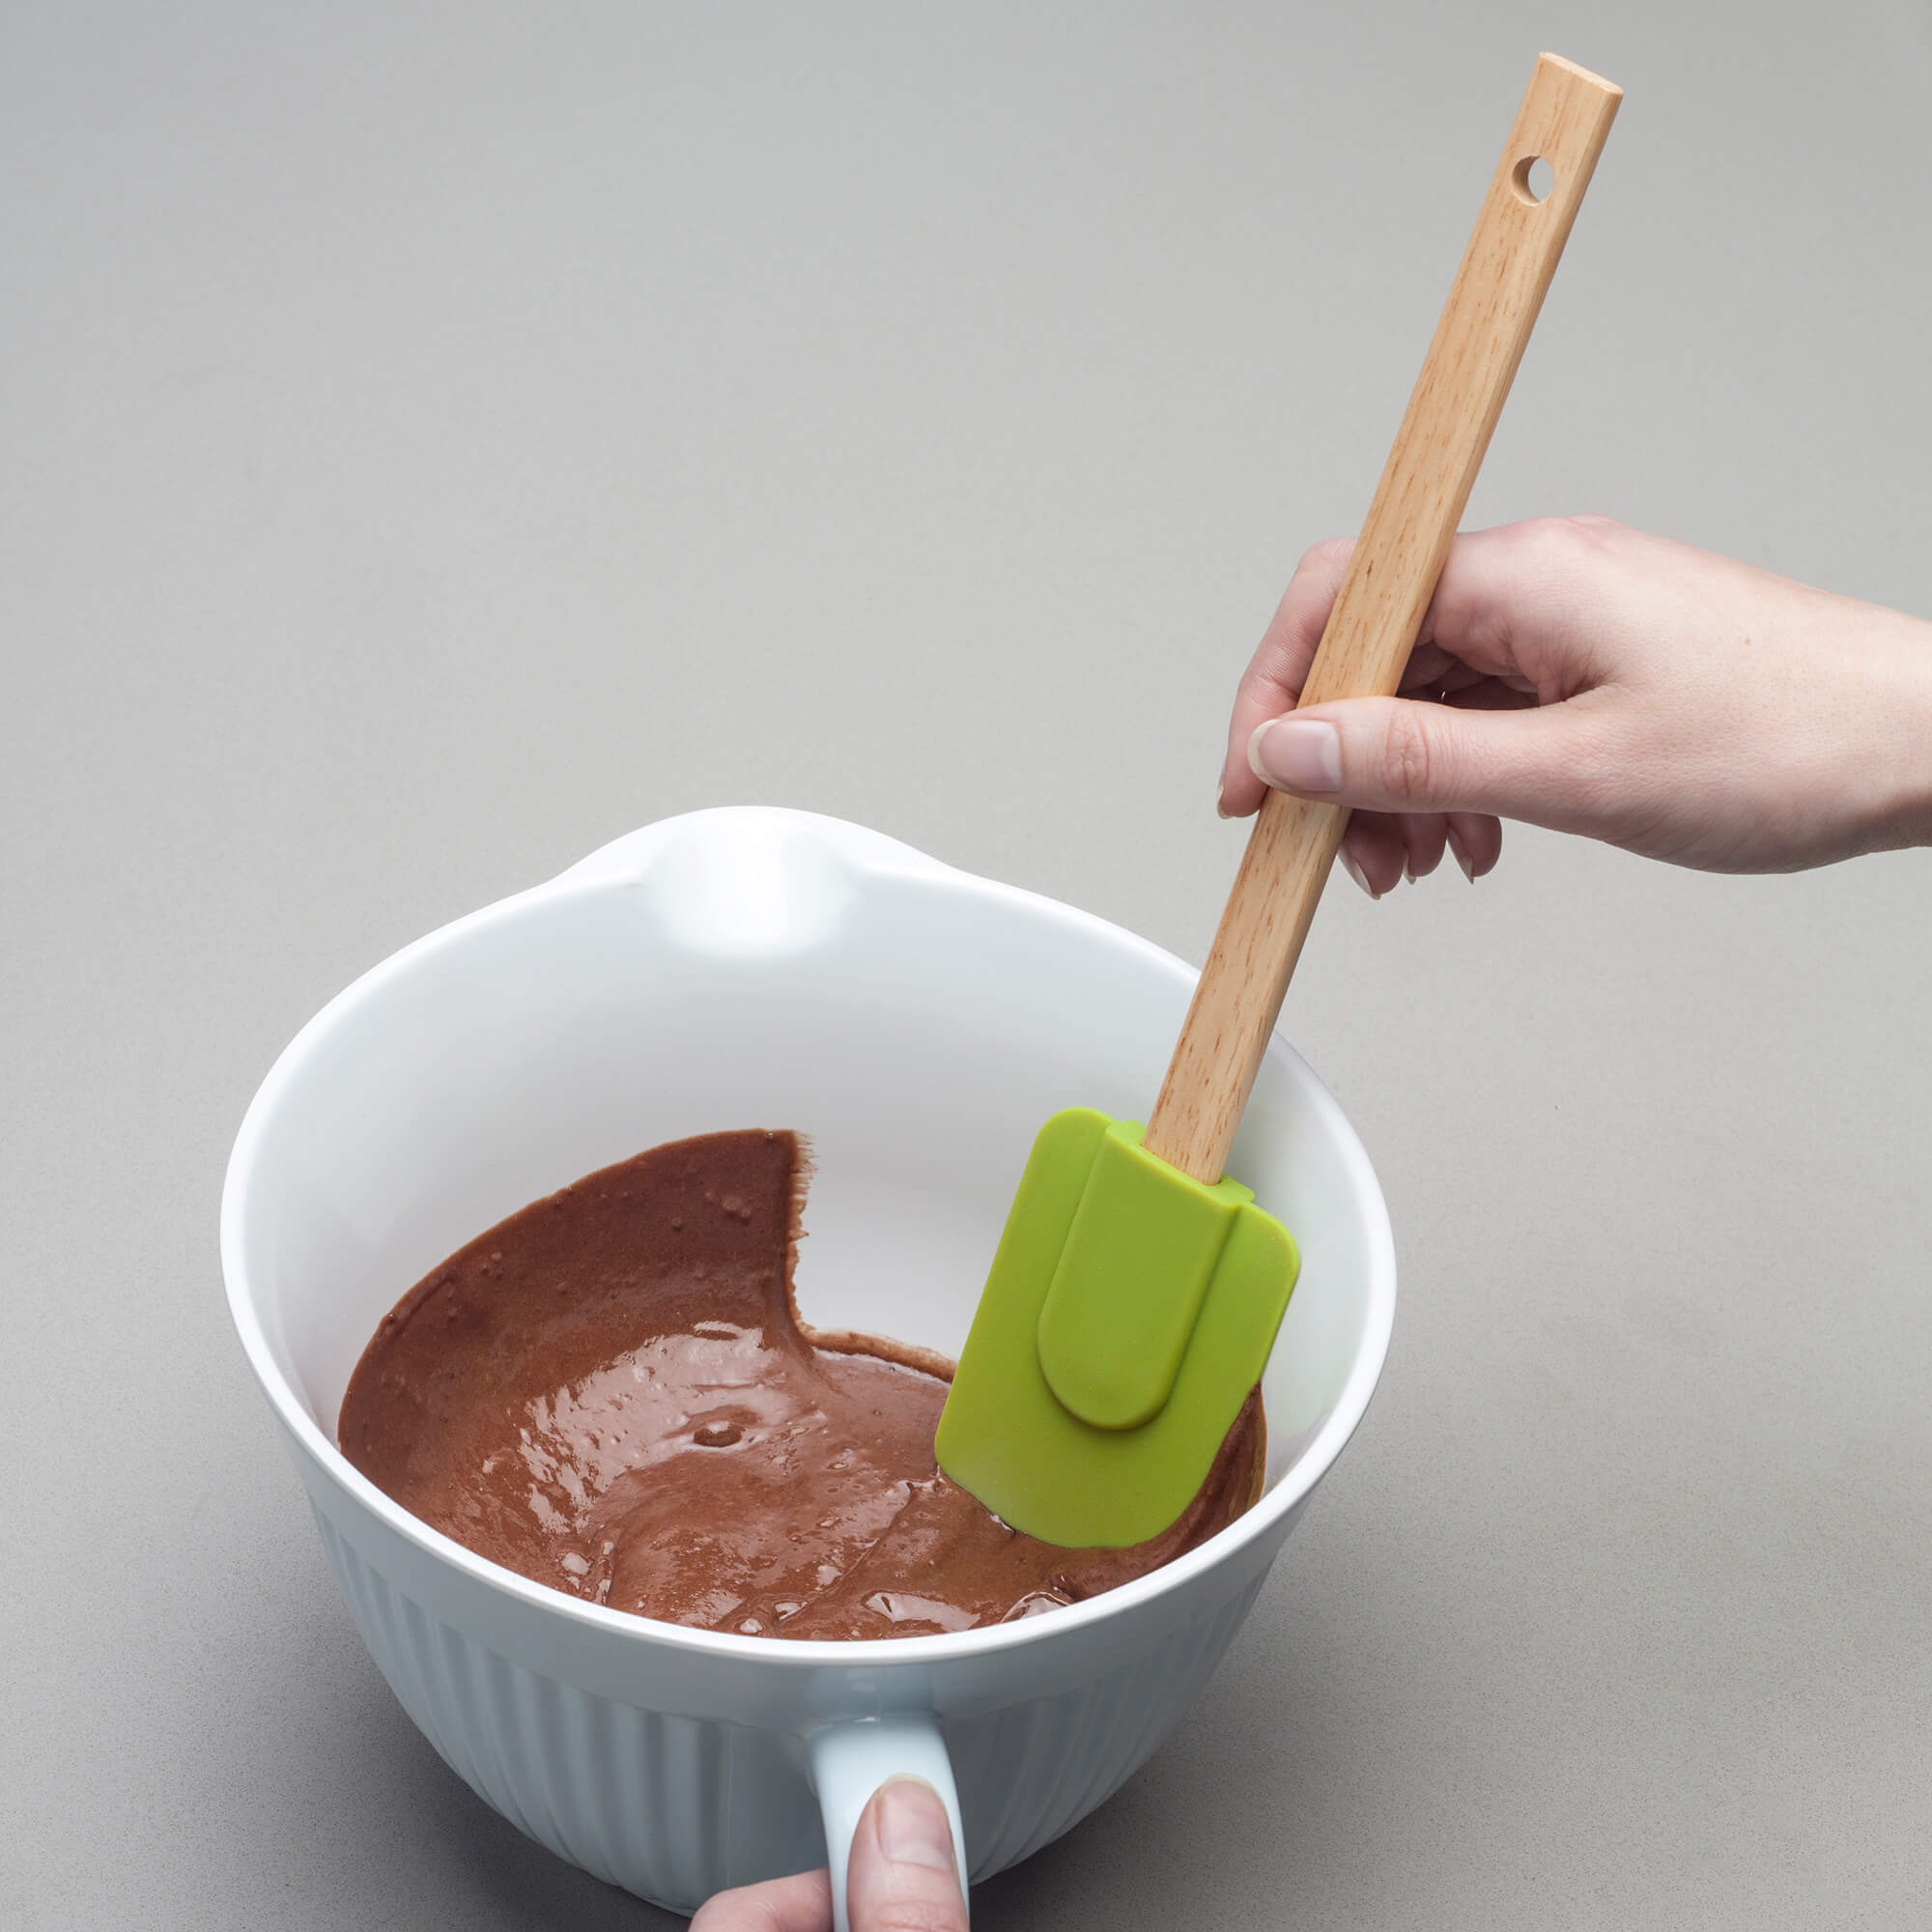 Using a Zeal Silicone Spatula to scrape a bowl